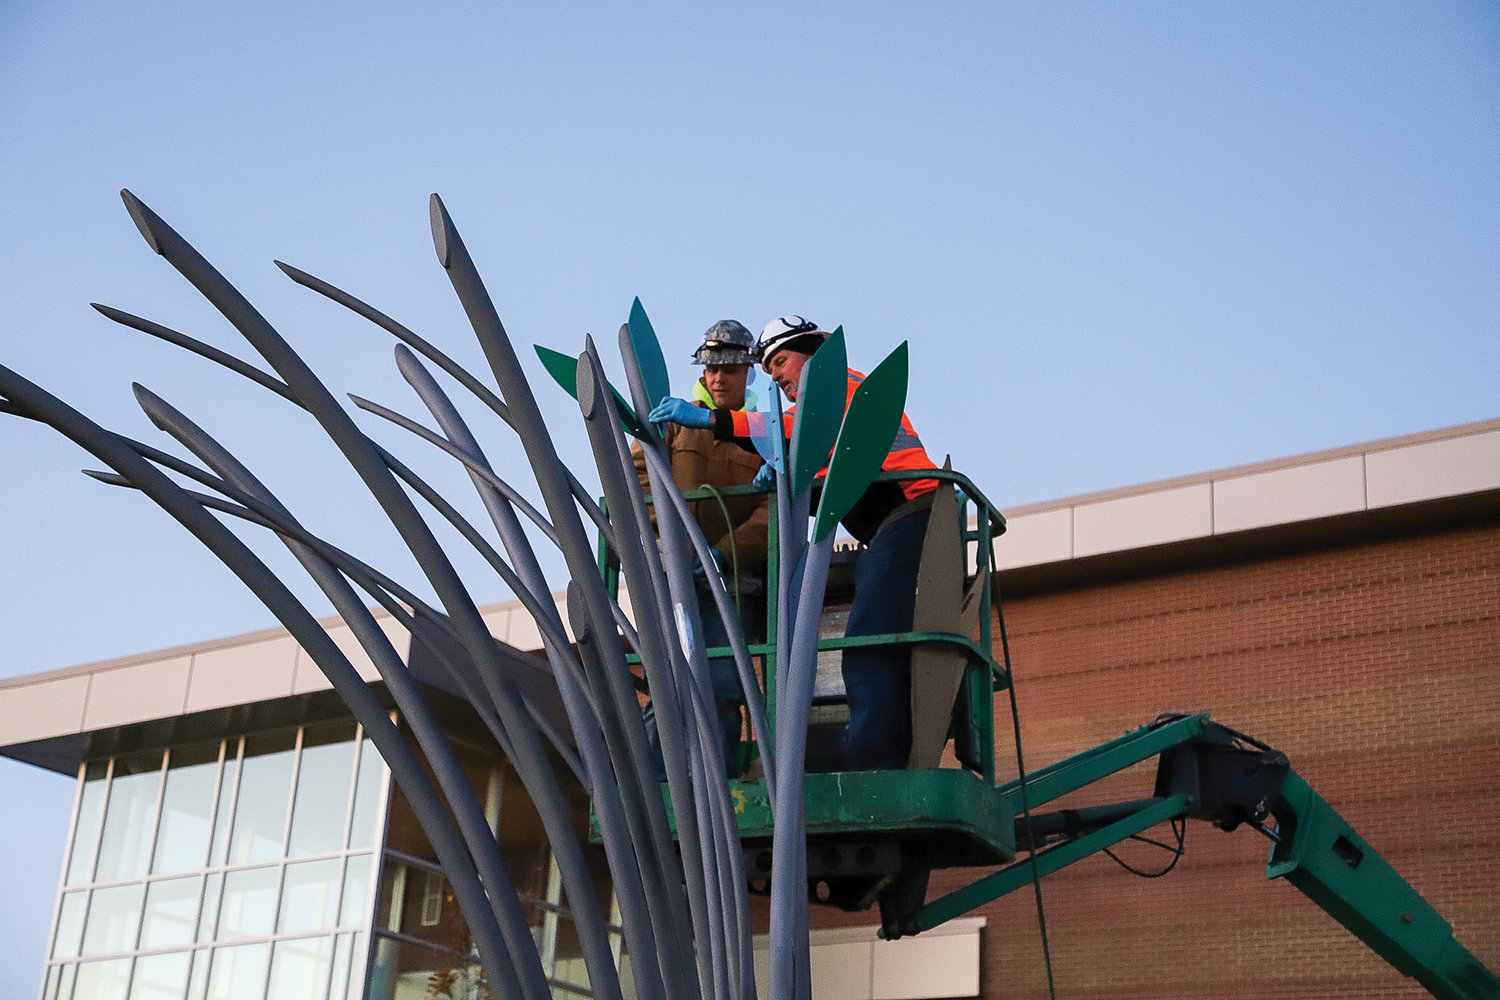 Battle Ground artist Curtis Pittman, left, alongside his fabricator and father-in-law Harold Combs, install the leaves of Pittman’s latest work at Ridgefield High School on Nov. 16.